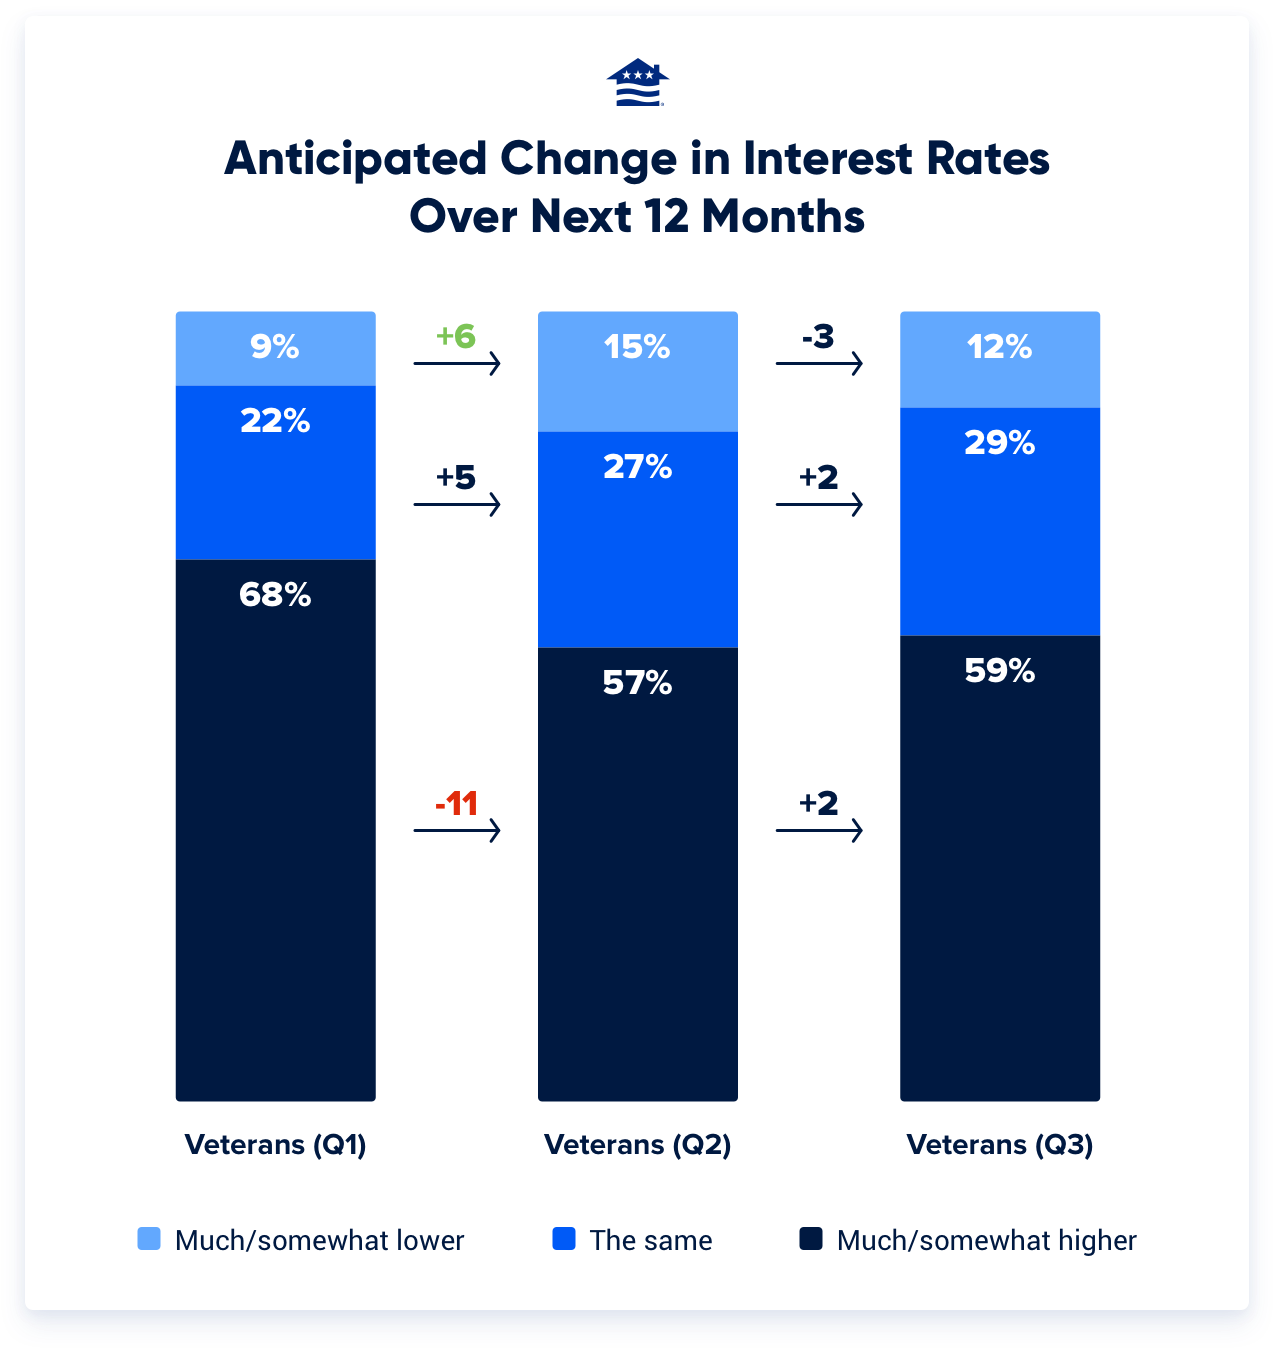 More than half of Veterans (59%) expect interest rates to be much or somewhat higher over the next year. That’s up slightly from the second quarter, but still more optimistic than Veterans were at the beginning of the year.